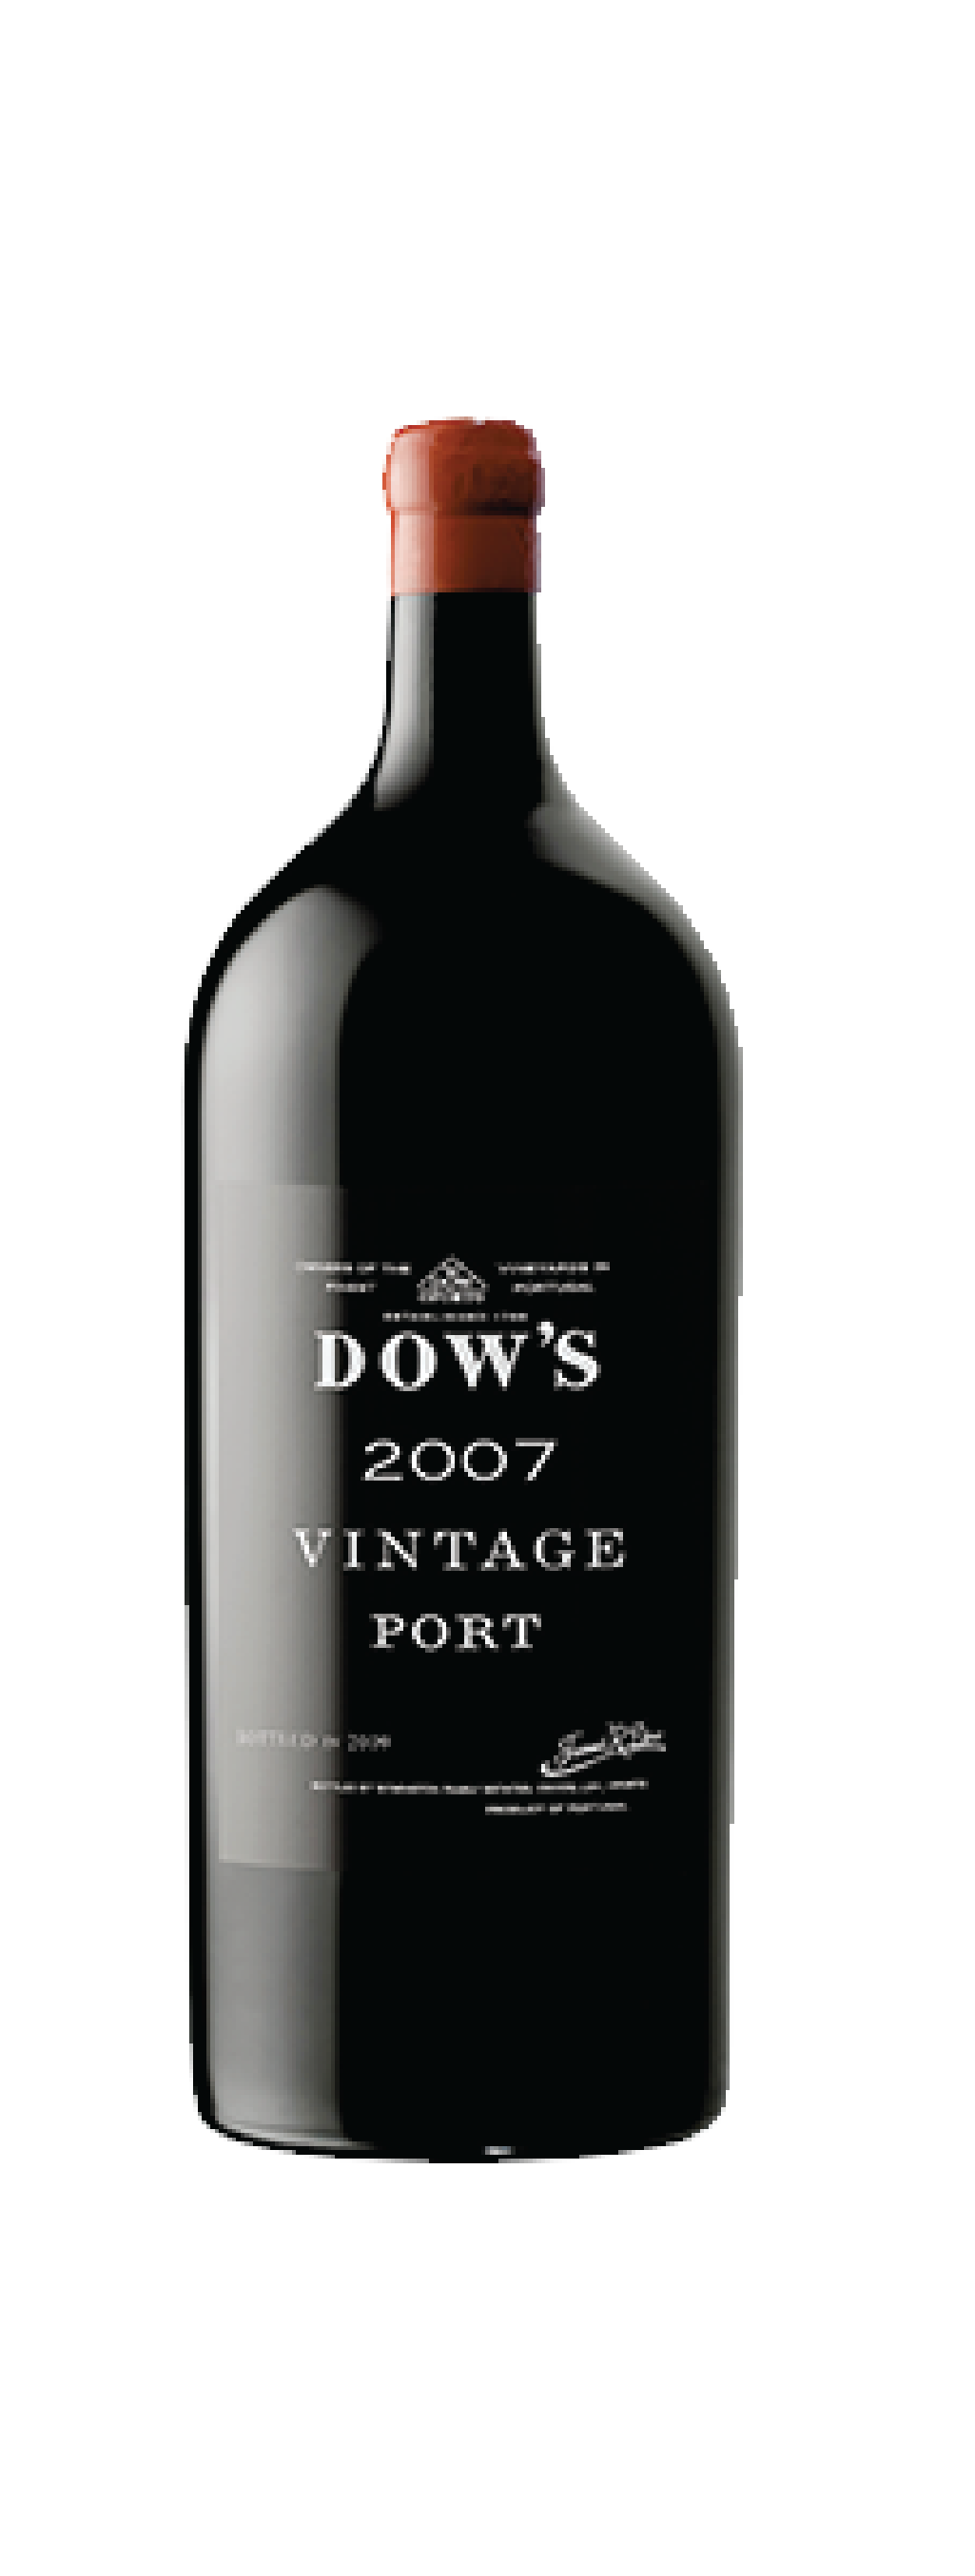 Product Image for DOW'S VINTAGE PORT 2007 - METHUSELAH (6L)